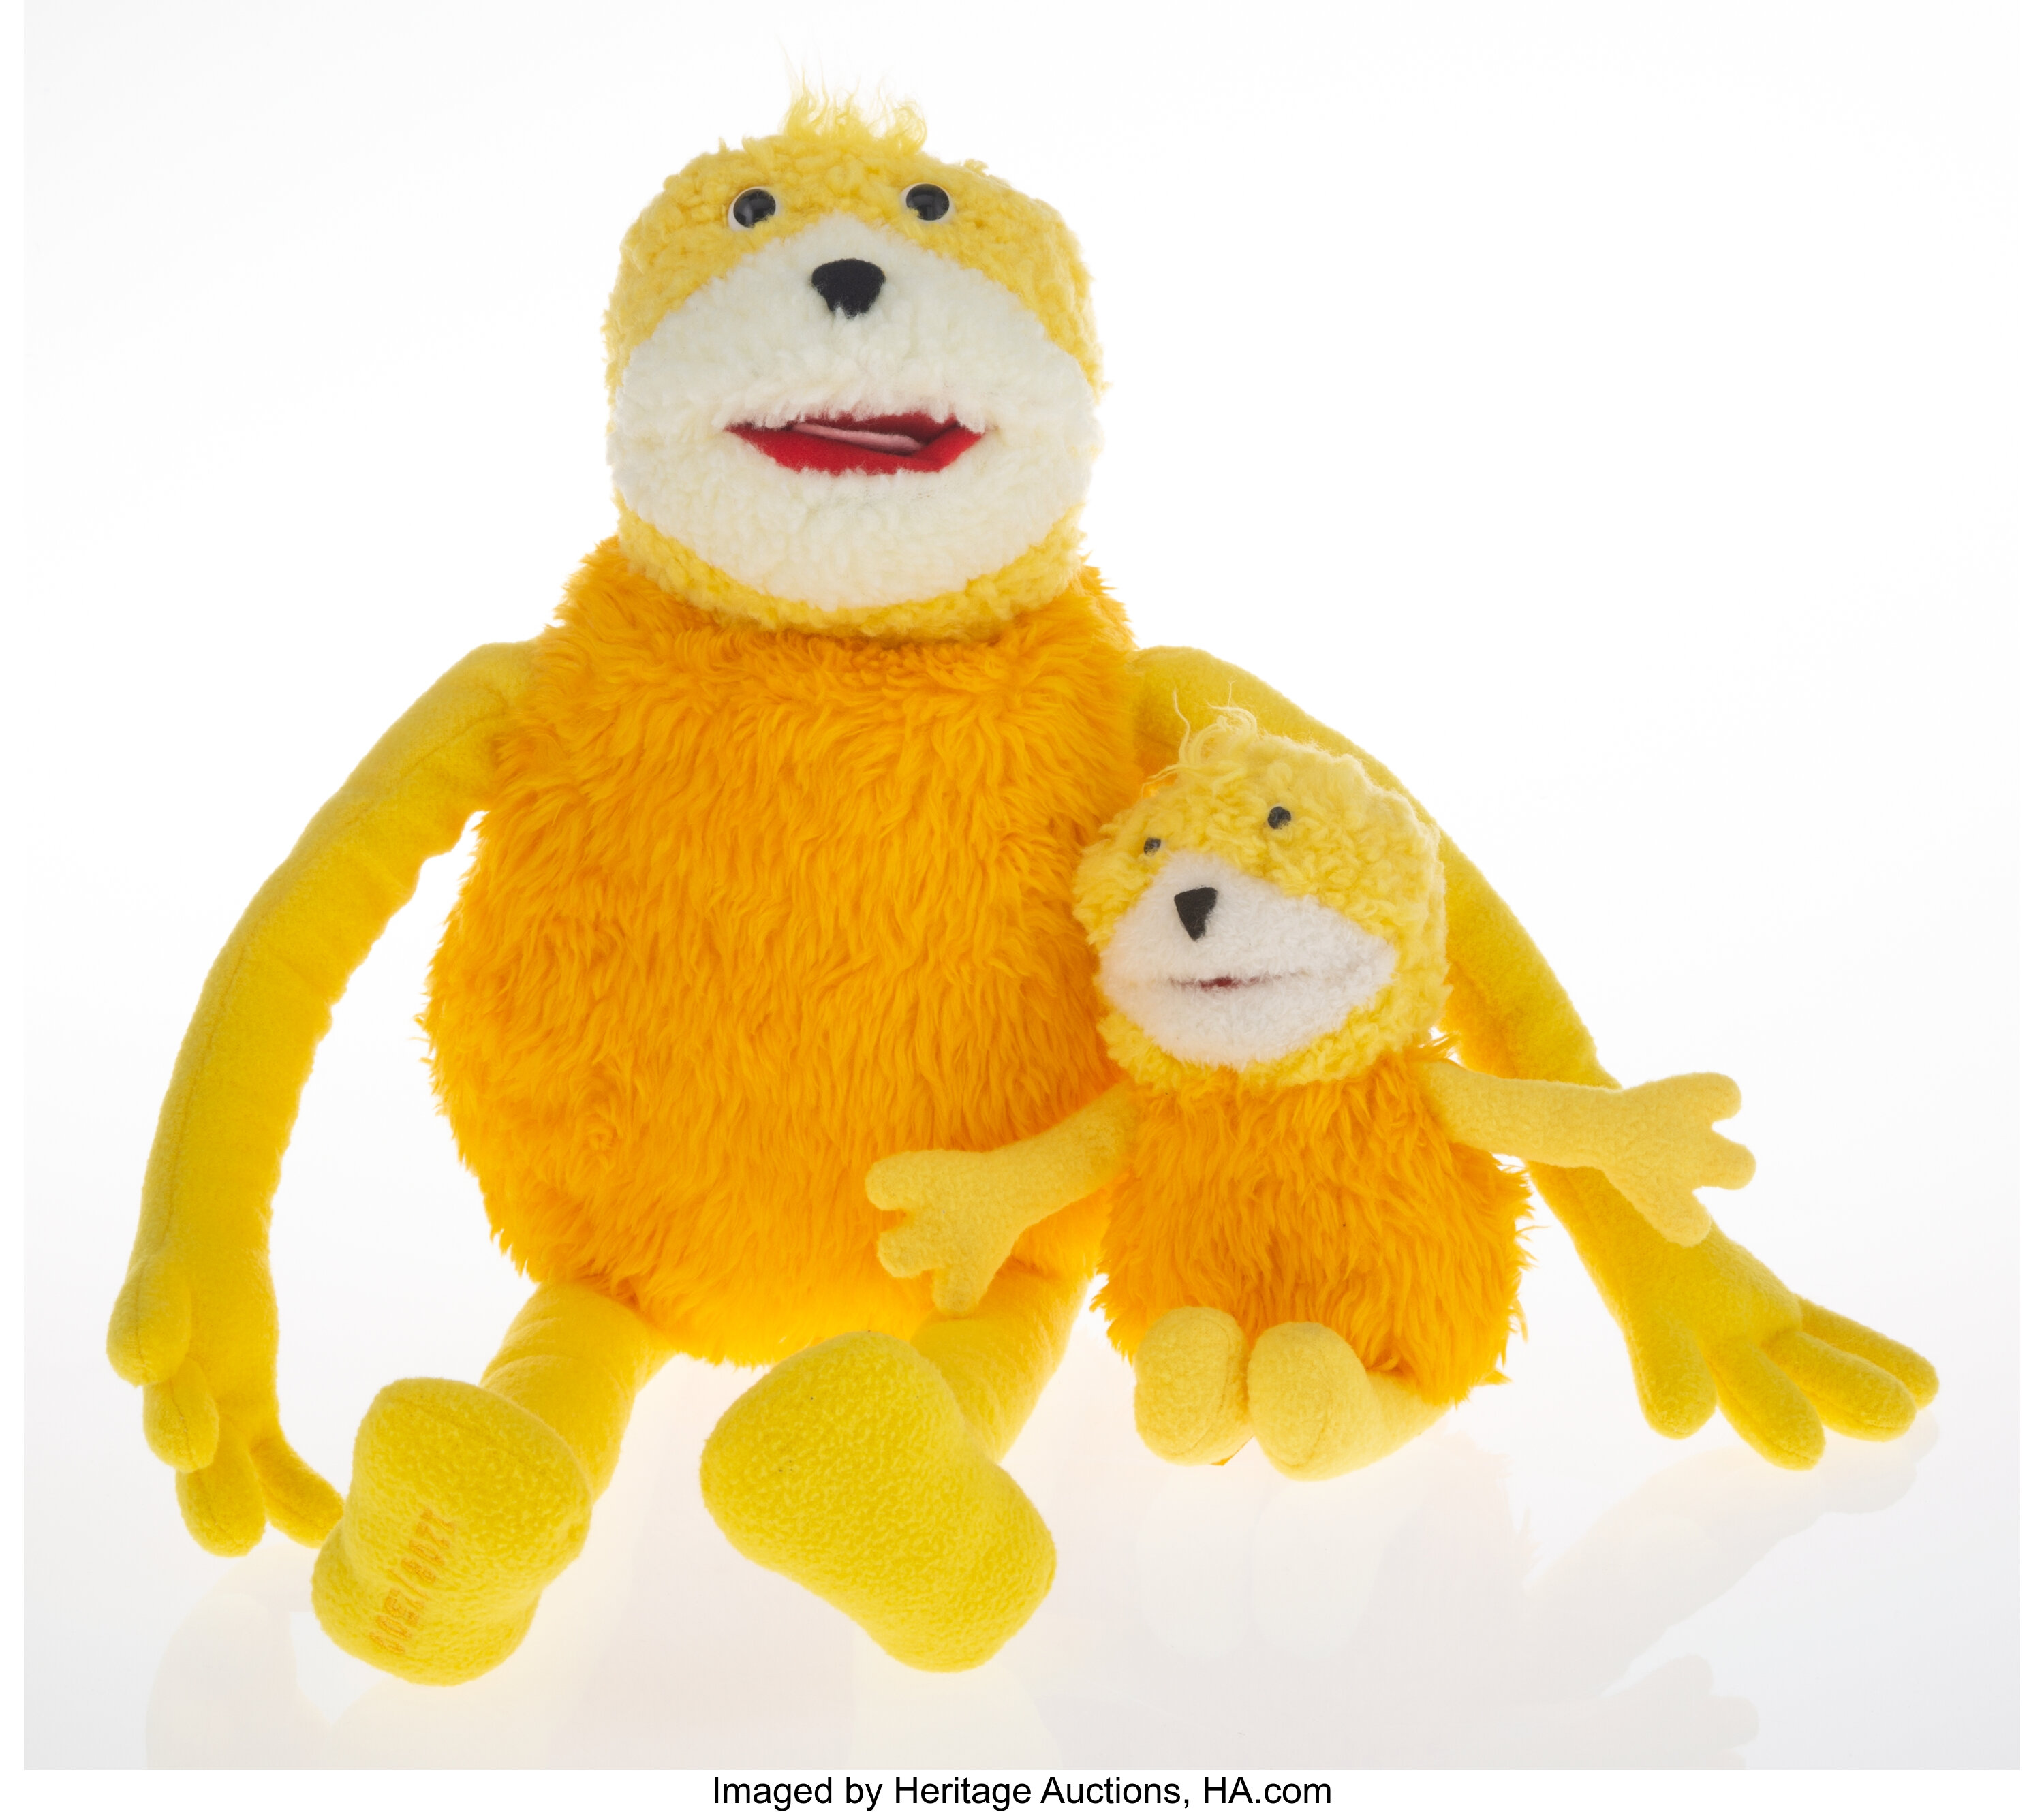 Mr. Oizo (Quentin Dupieux) X Flat Eric | Lot #42275 | Heritage Auctions